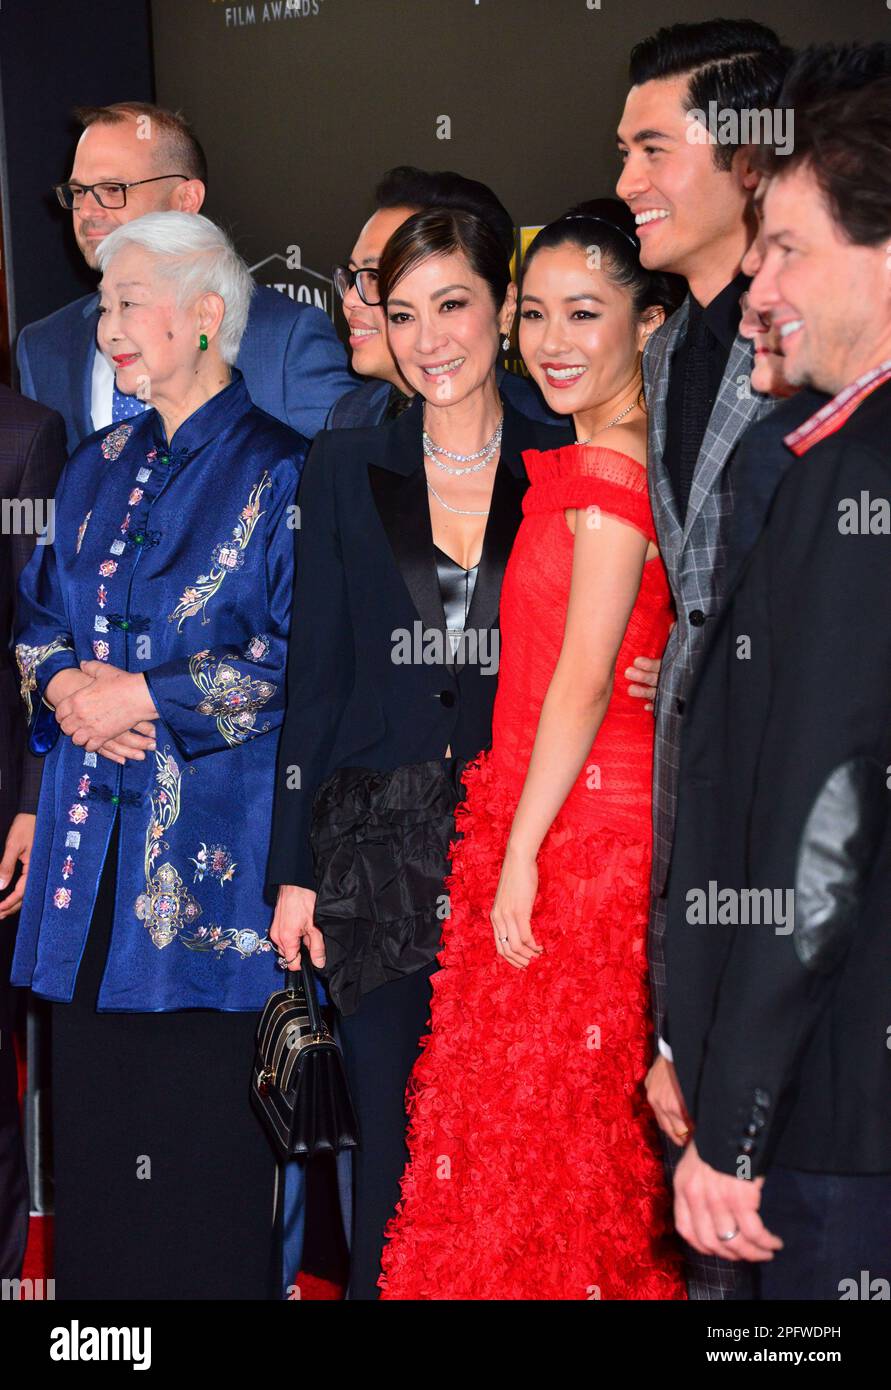 Lisa lu, Michelle Yeoh, Constance Wu, Henry Golding 060 attends the 22nd Annual Hollywood Film Awards at The Beverly Hilton Hotel on November 4, 2018 in Beverly Hills, California.Richard Belzer, Comedian and Law & Order- SVU Mainstay, Dead at 78    © Tsuni / USA a Lisa lu, Michelle Yeoh, Constance Wu, Henry Golding 060 Stock Photo